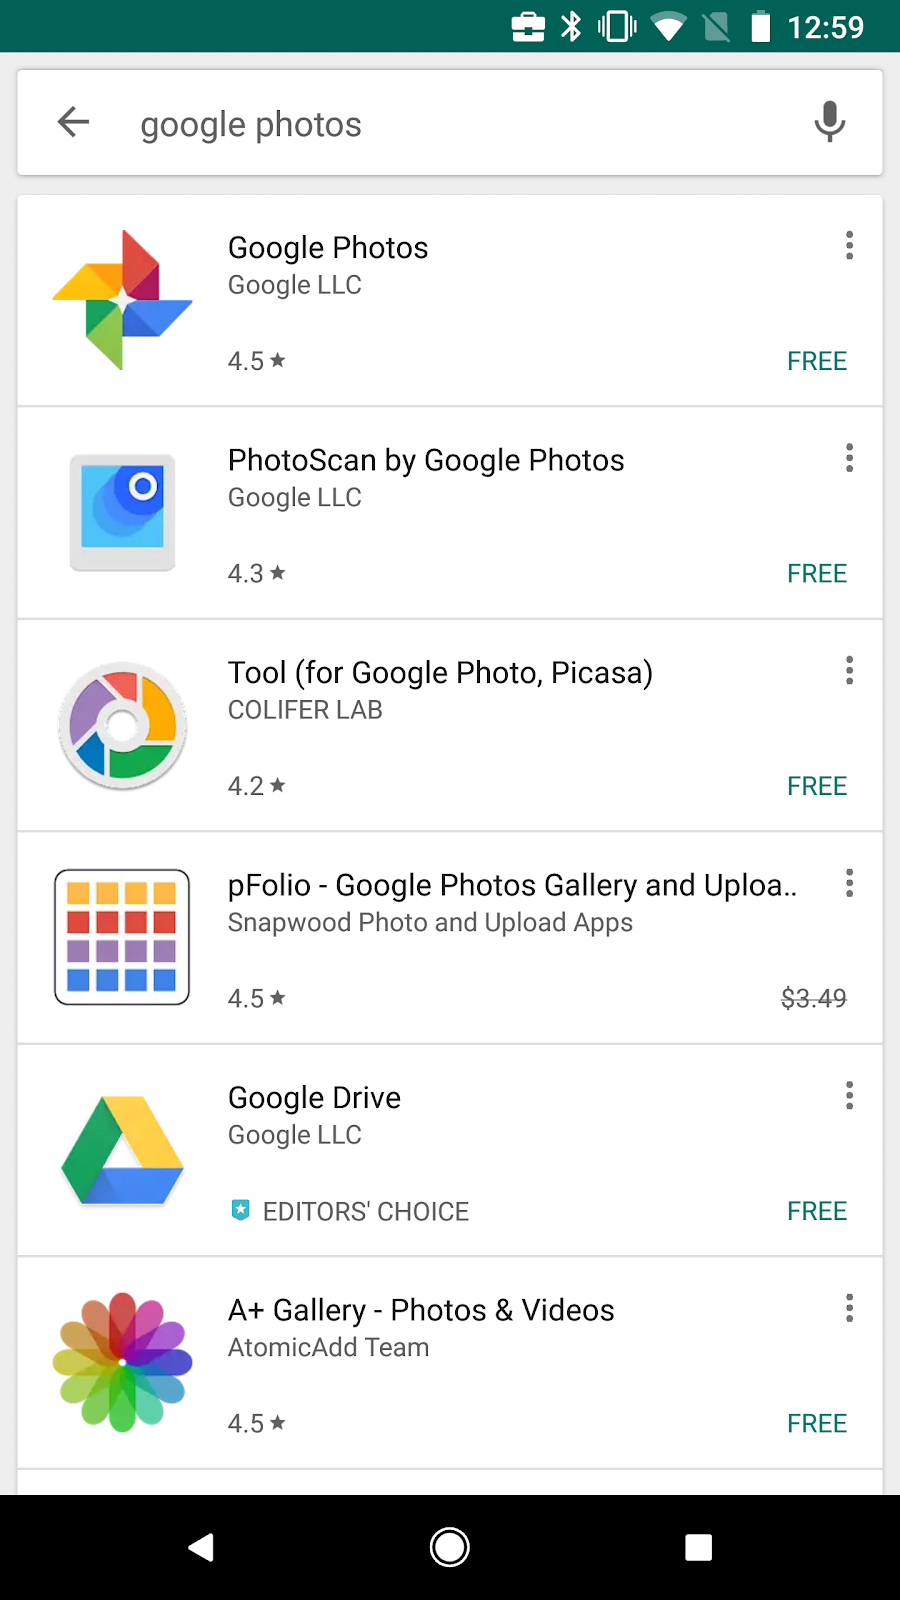 How to install the Google Play Store on any Android device